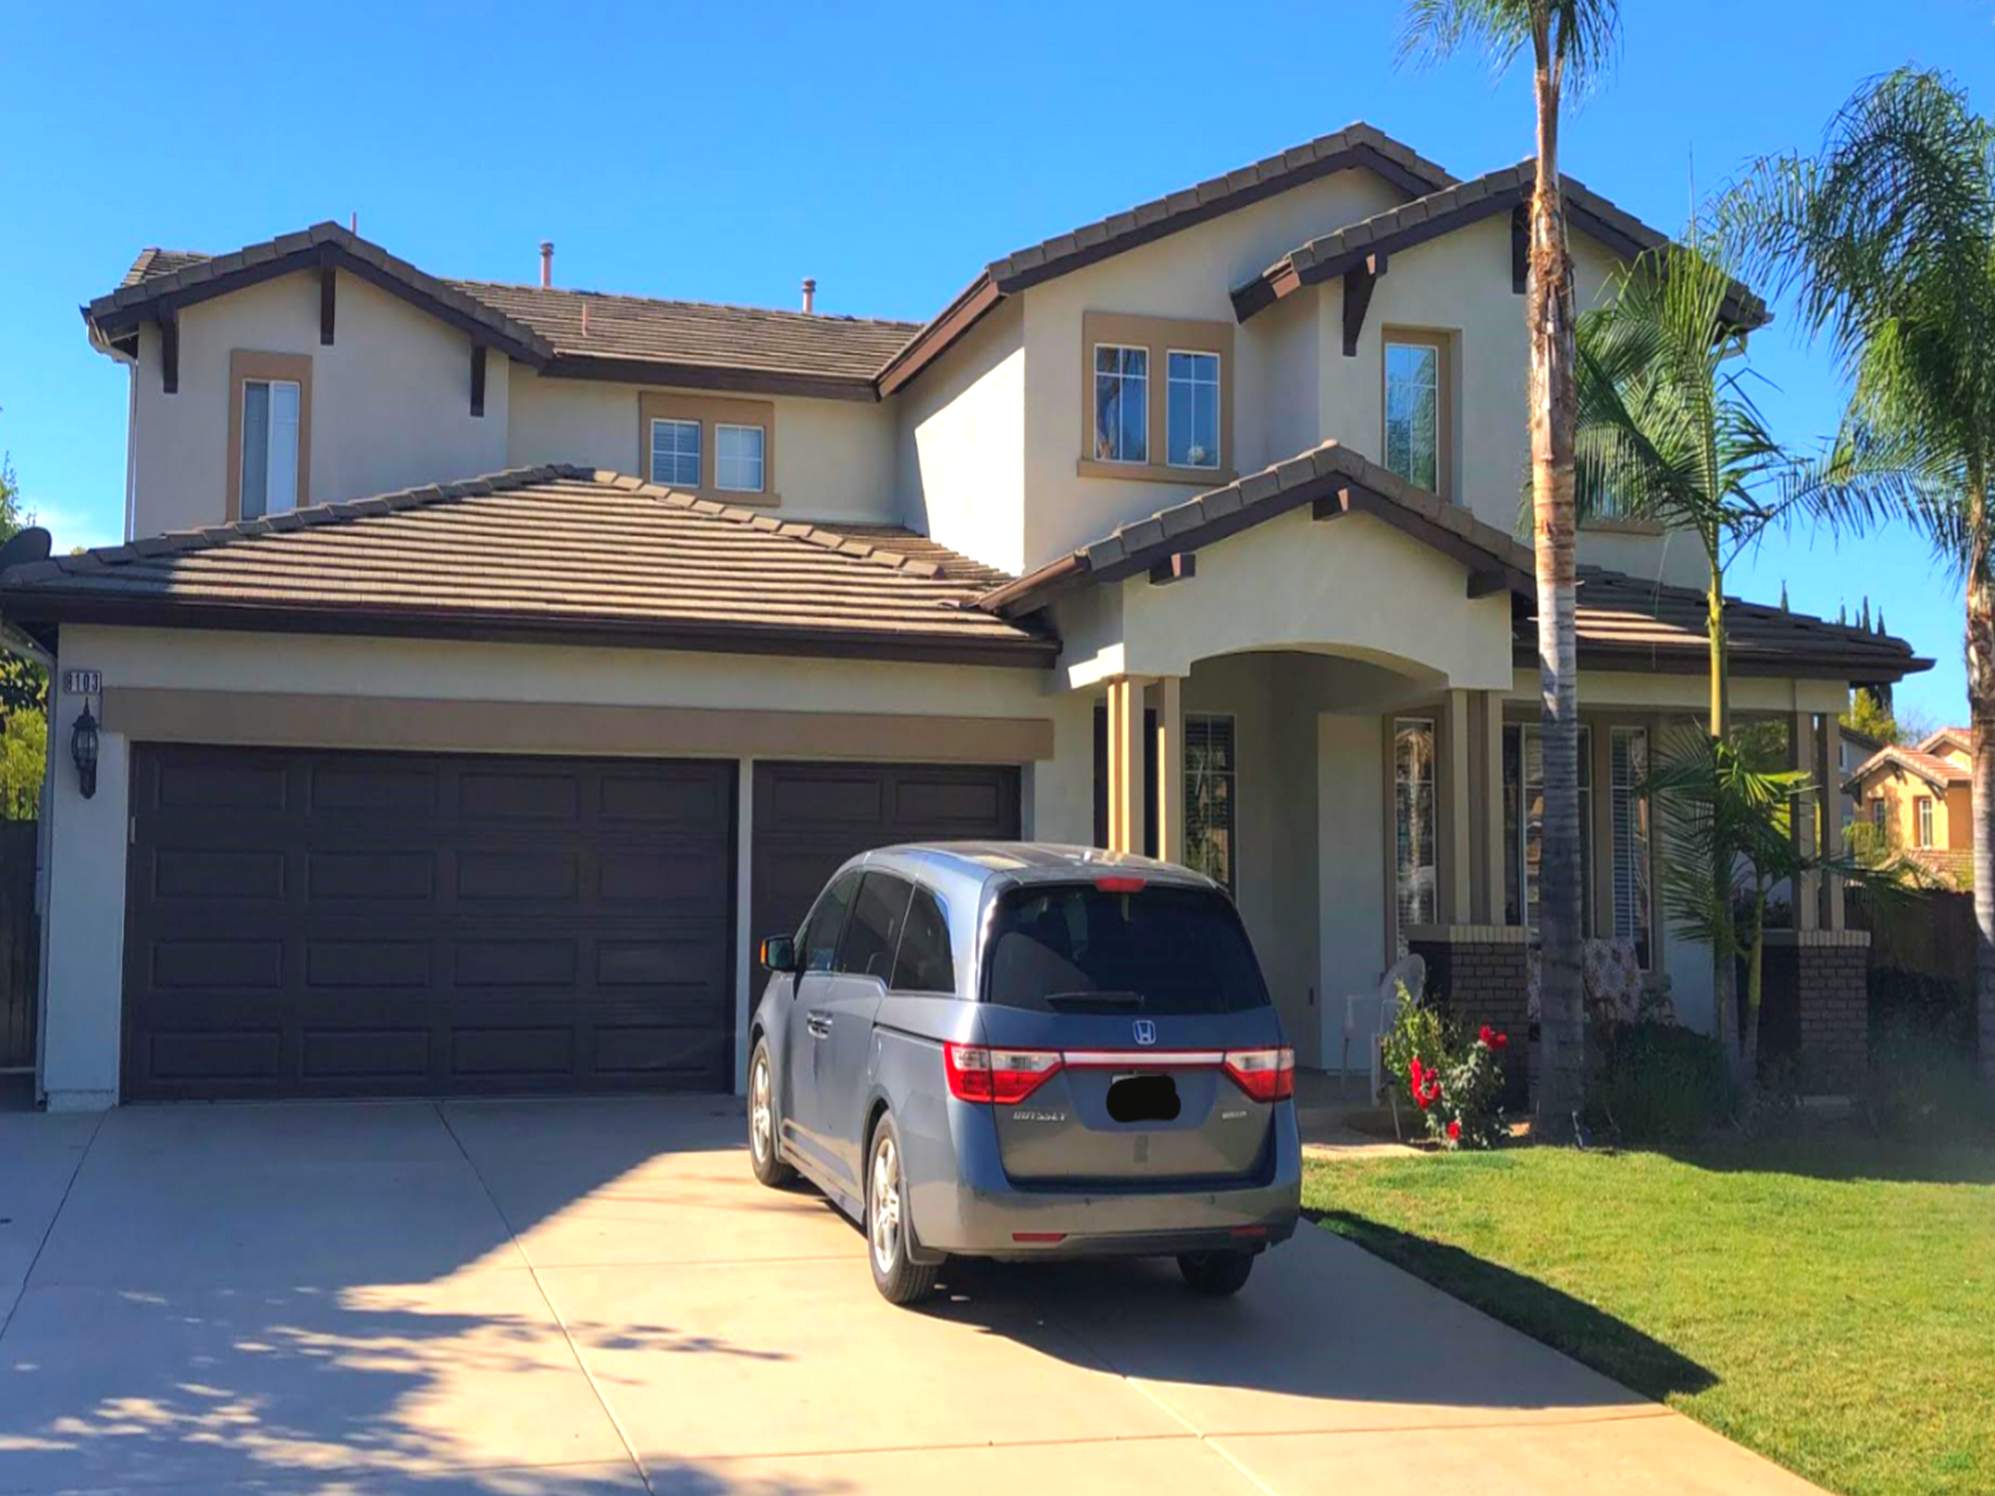 House Painting Project in Riverside, CA